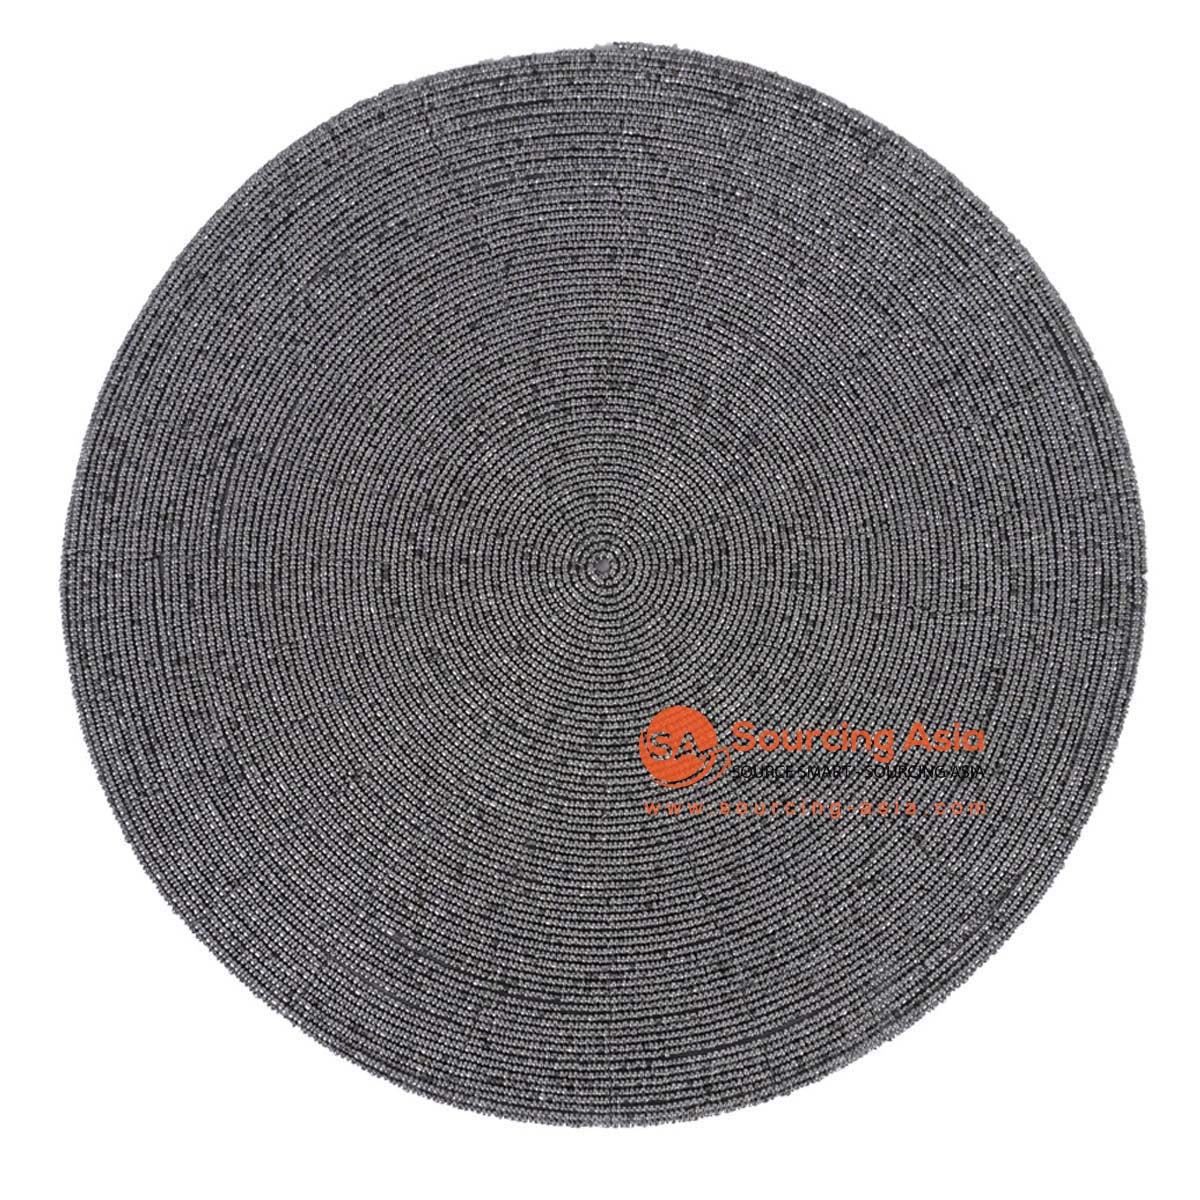 HBSC584-2 GREY BEADS ROUND PLACEMAT